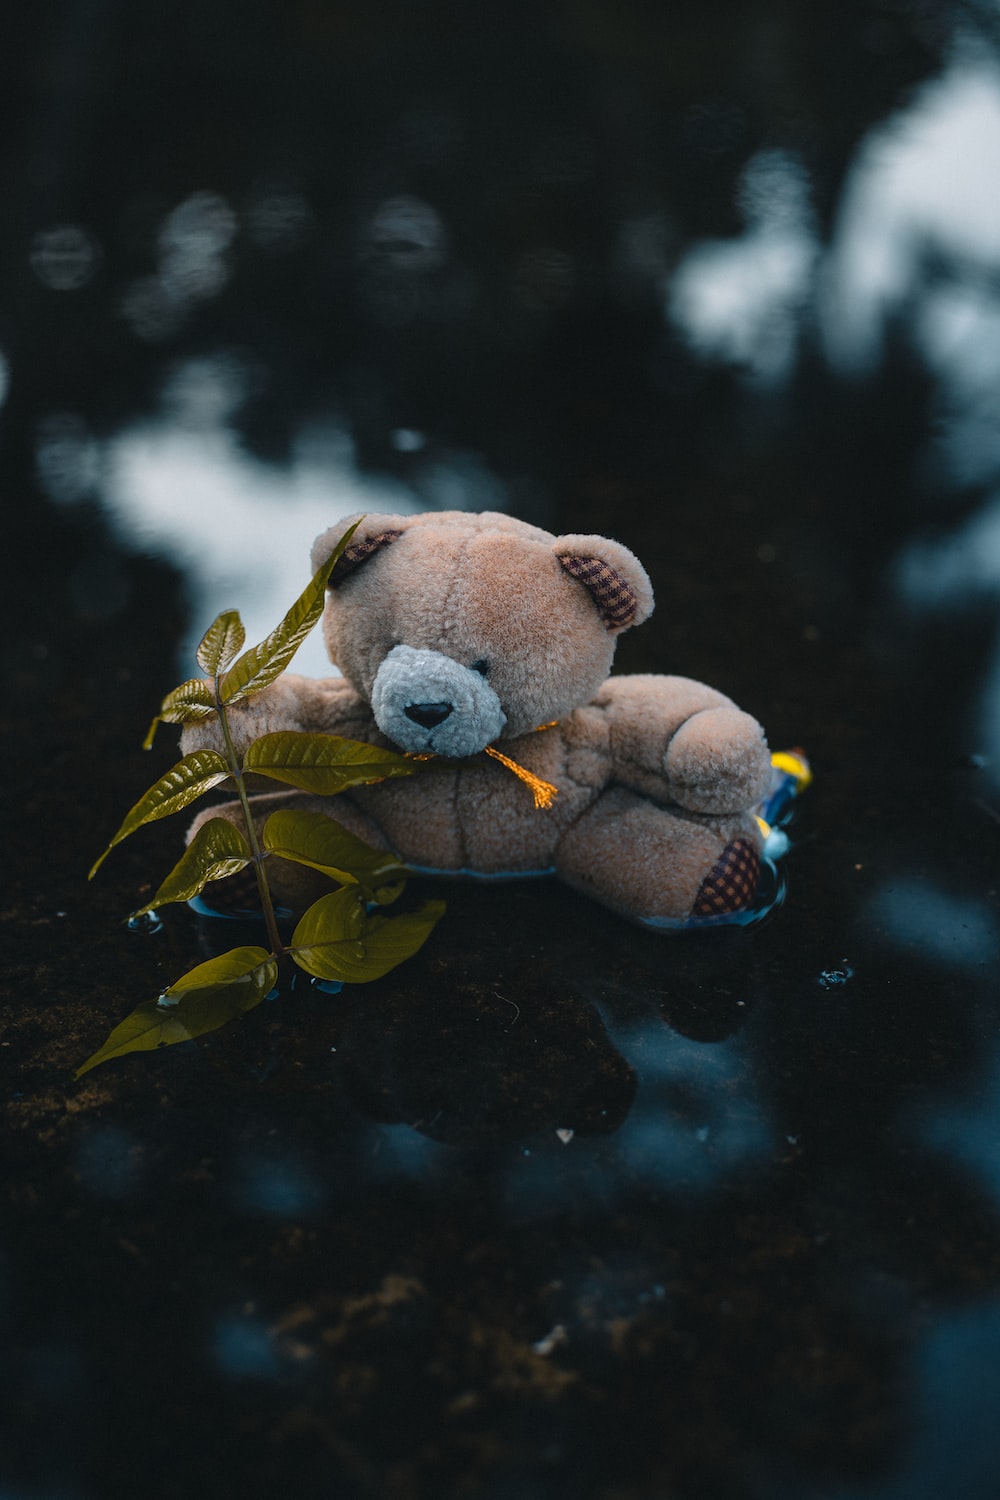 Best Teddy Bear Picture [HD]. Download Free Image